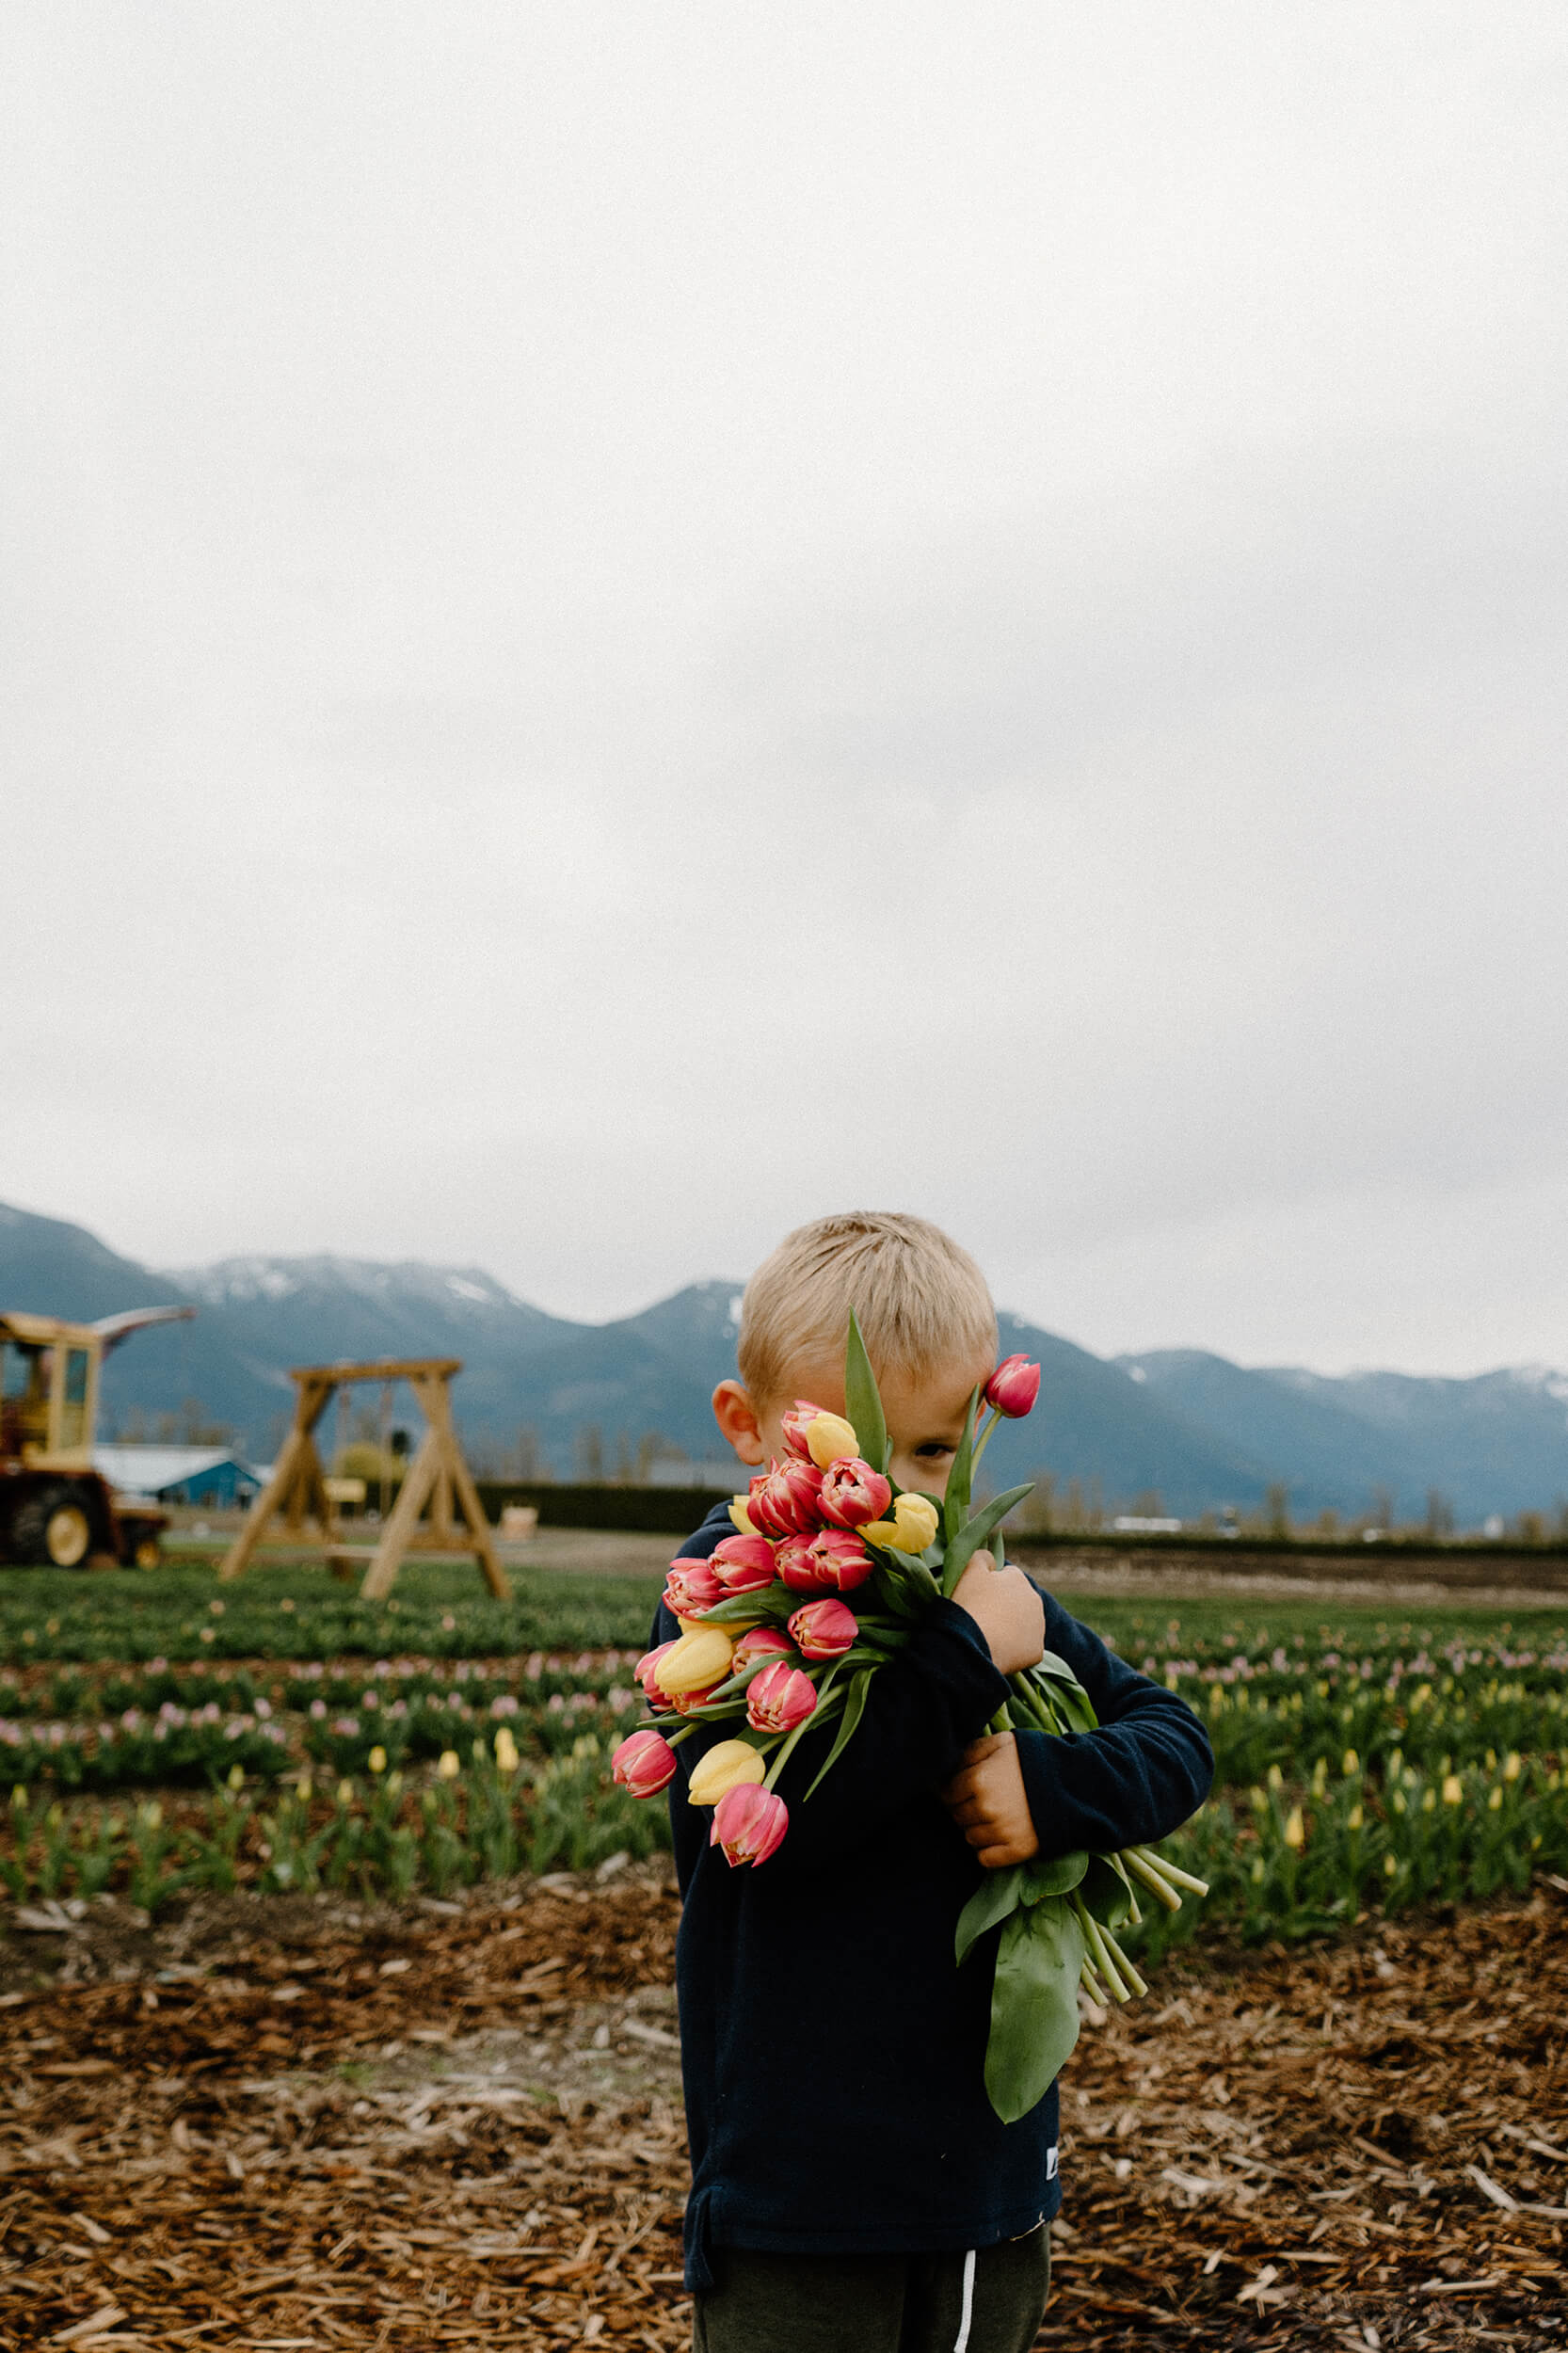 A child holds a bunch of tulips in front of their face, standing in front of a field of tulips